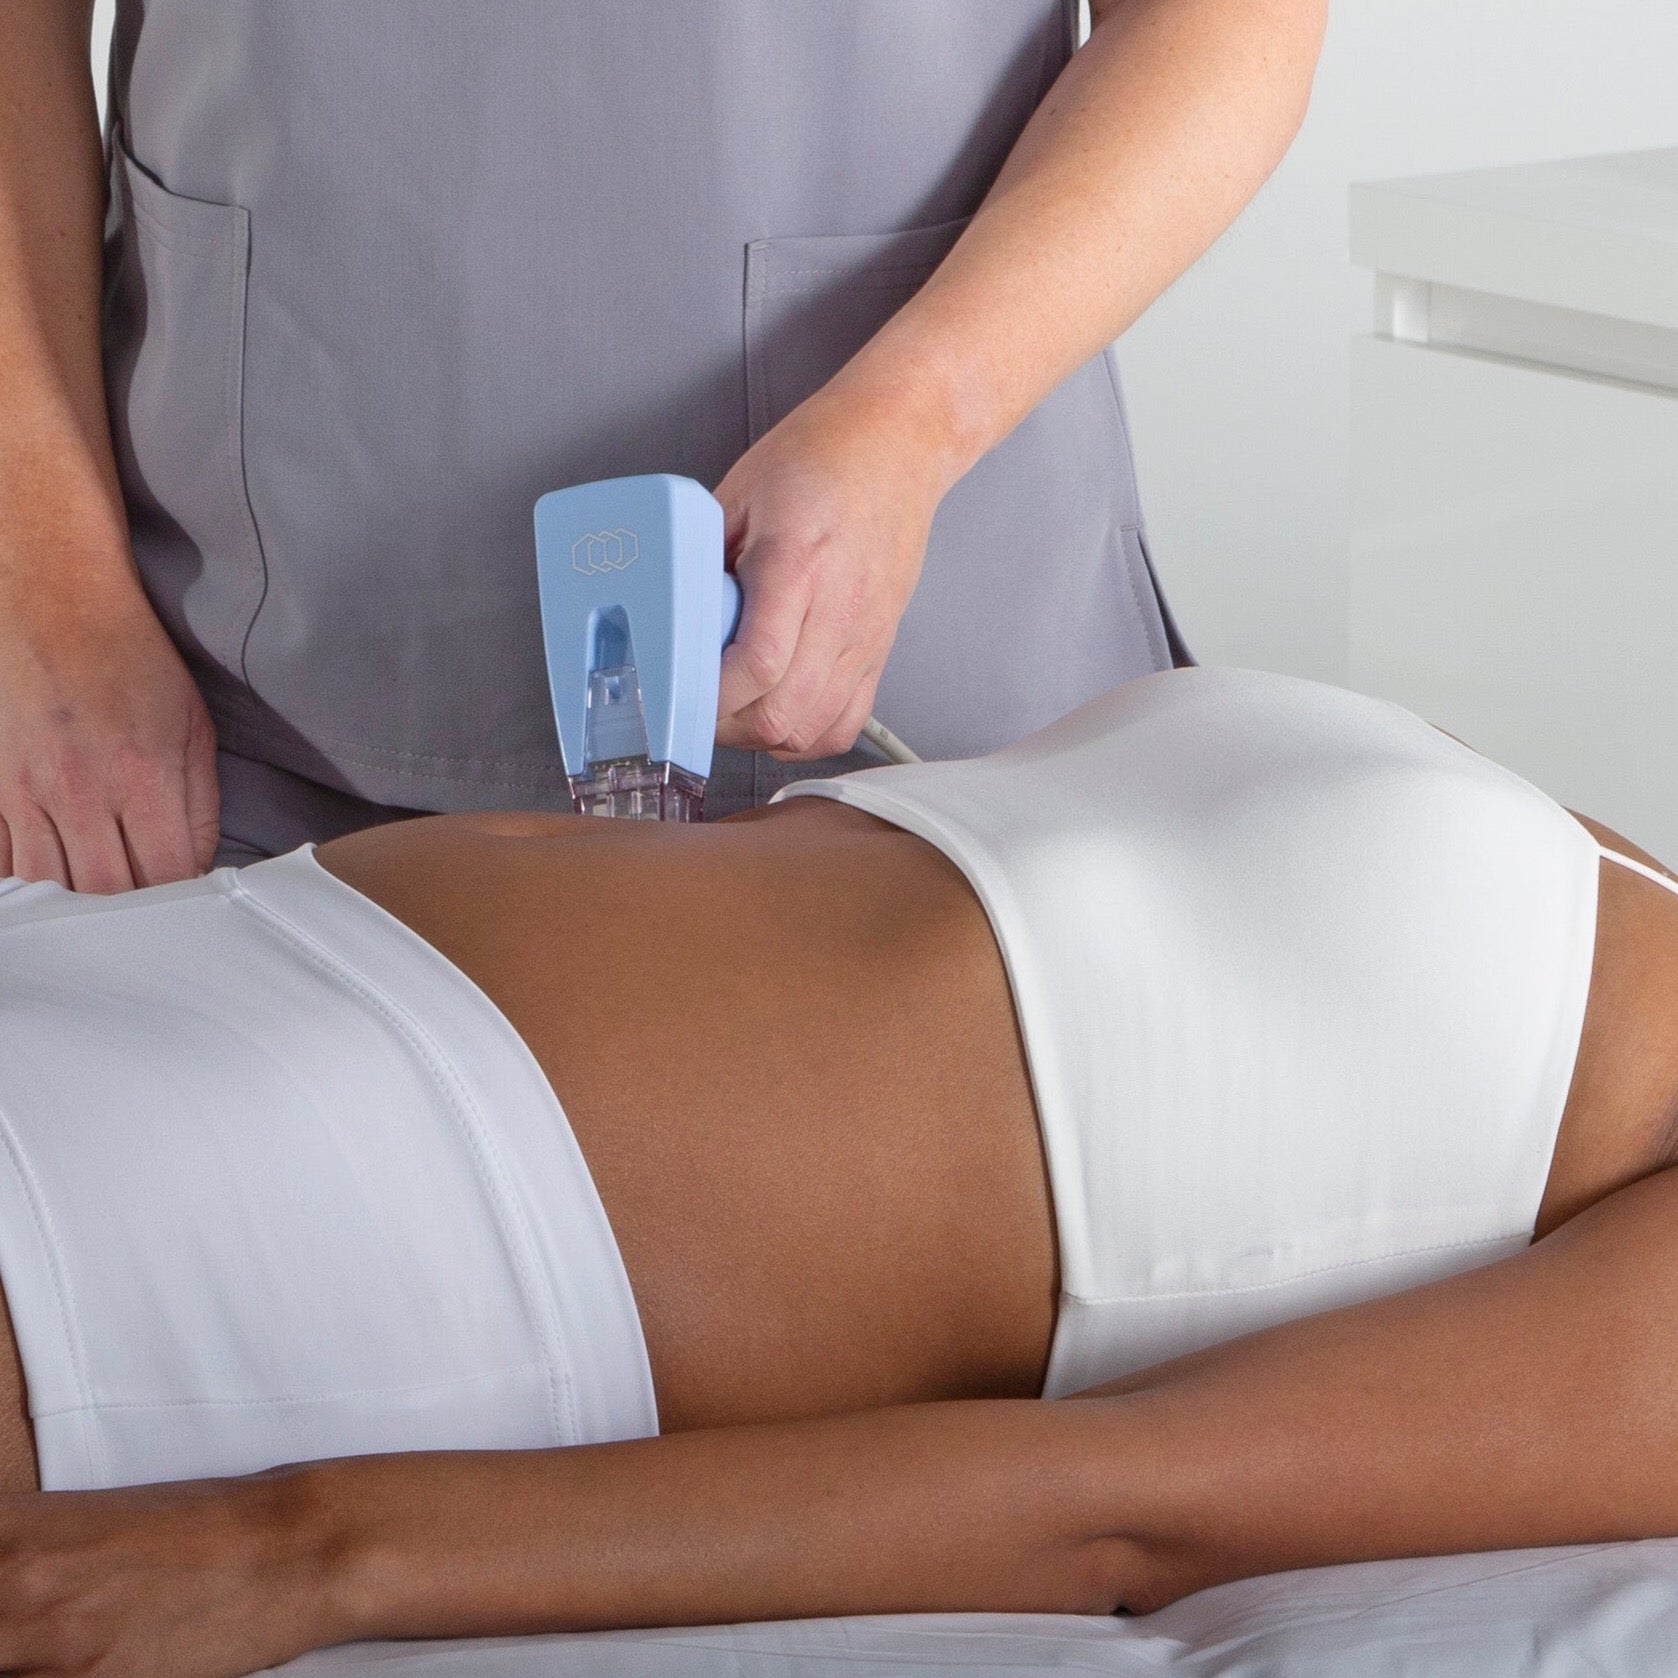 Sculpt and tighten your body with award-winning Morpheus8 fractional radio frequency technology at CJ Laser. Treating stubborn fat, stretch marks, loose skin and more